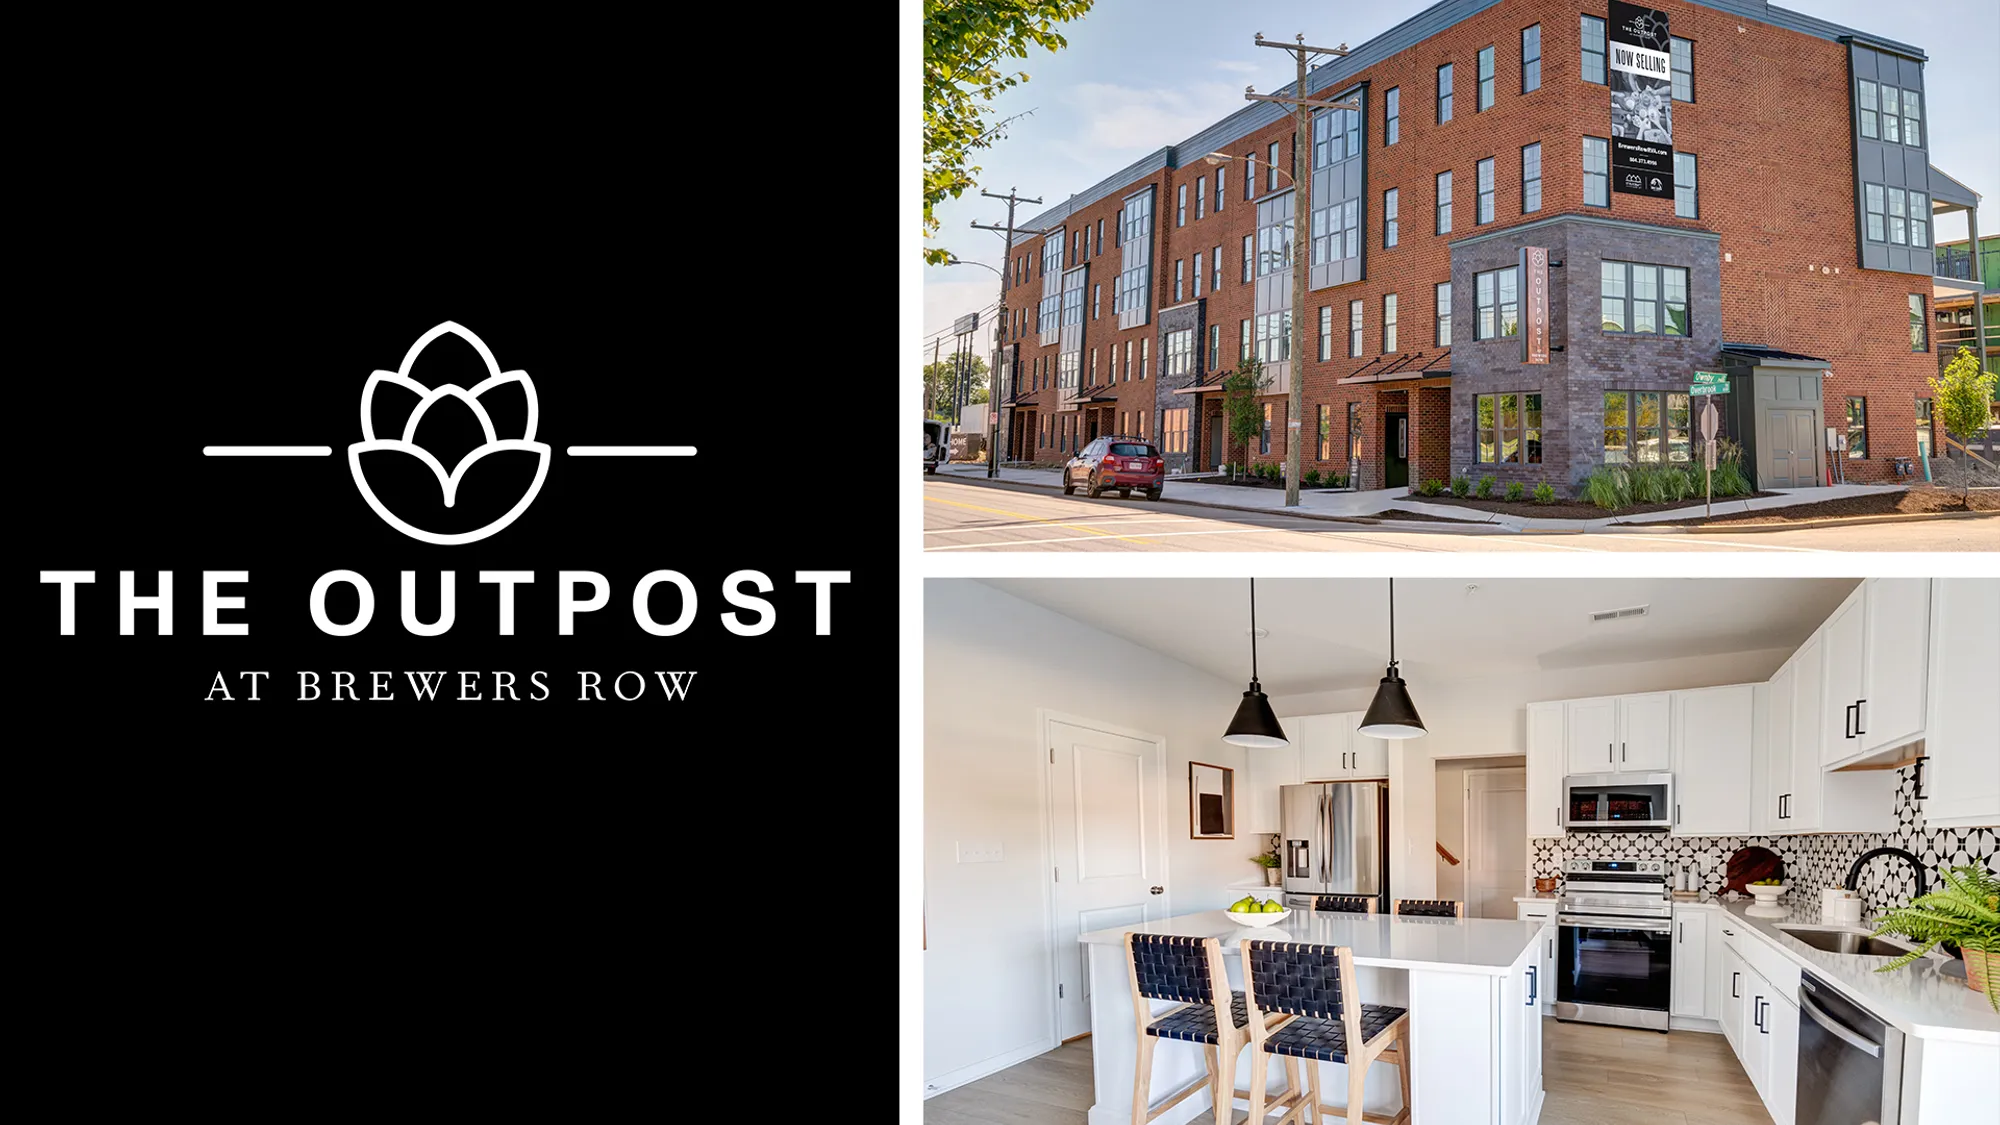 The Outpost at Brewers Row in Richmond, VA